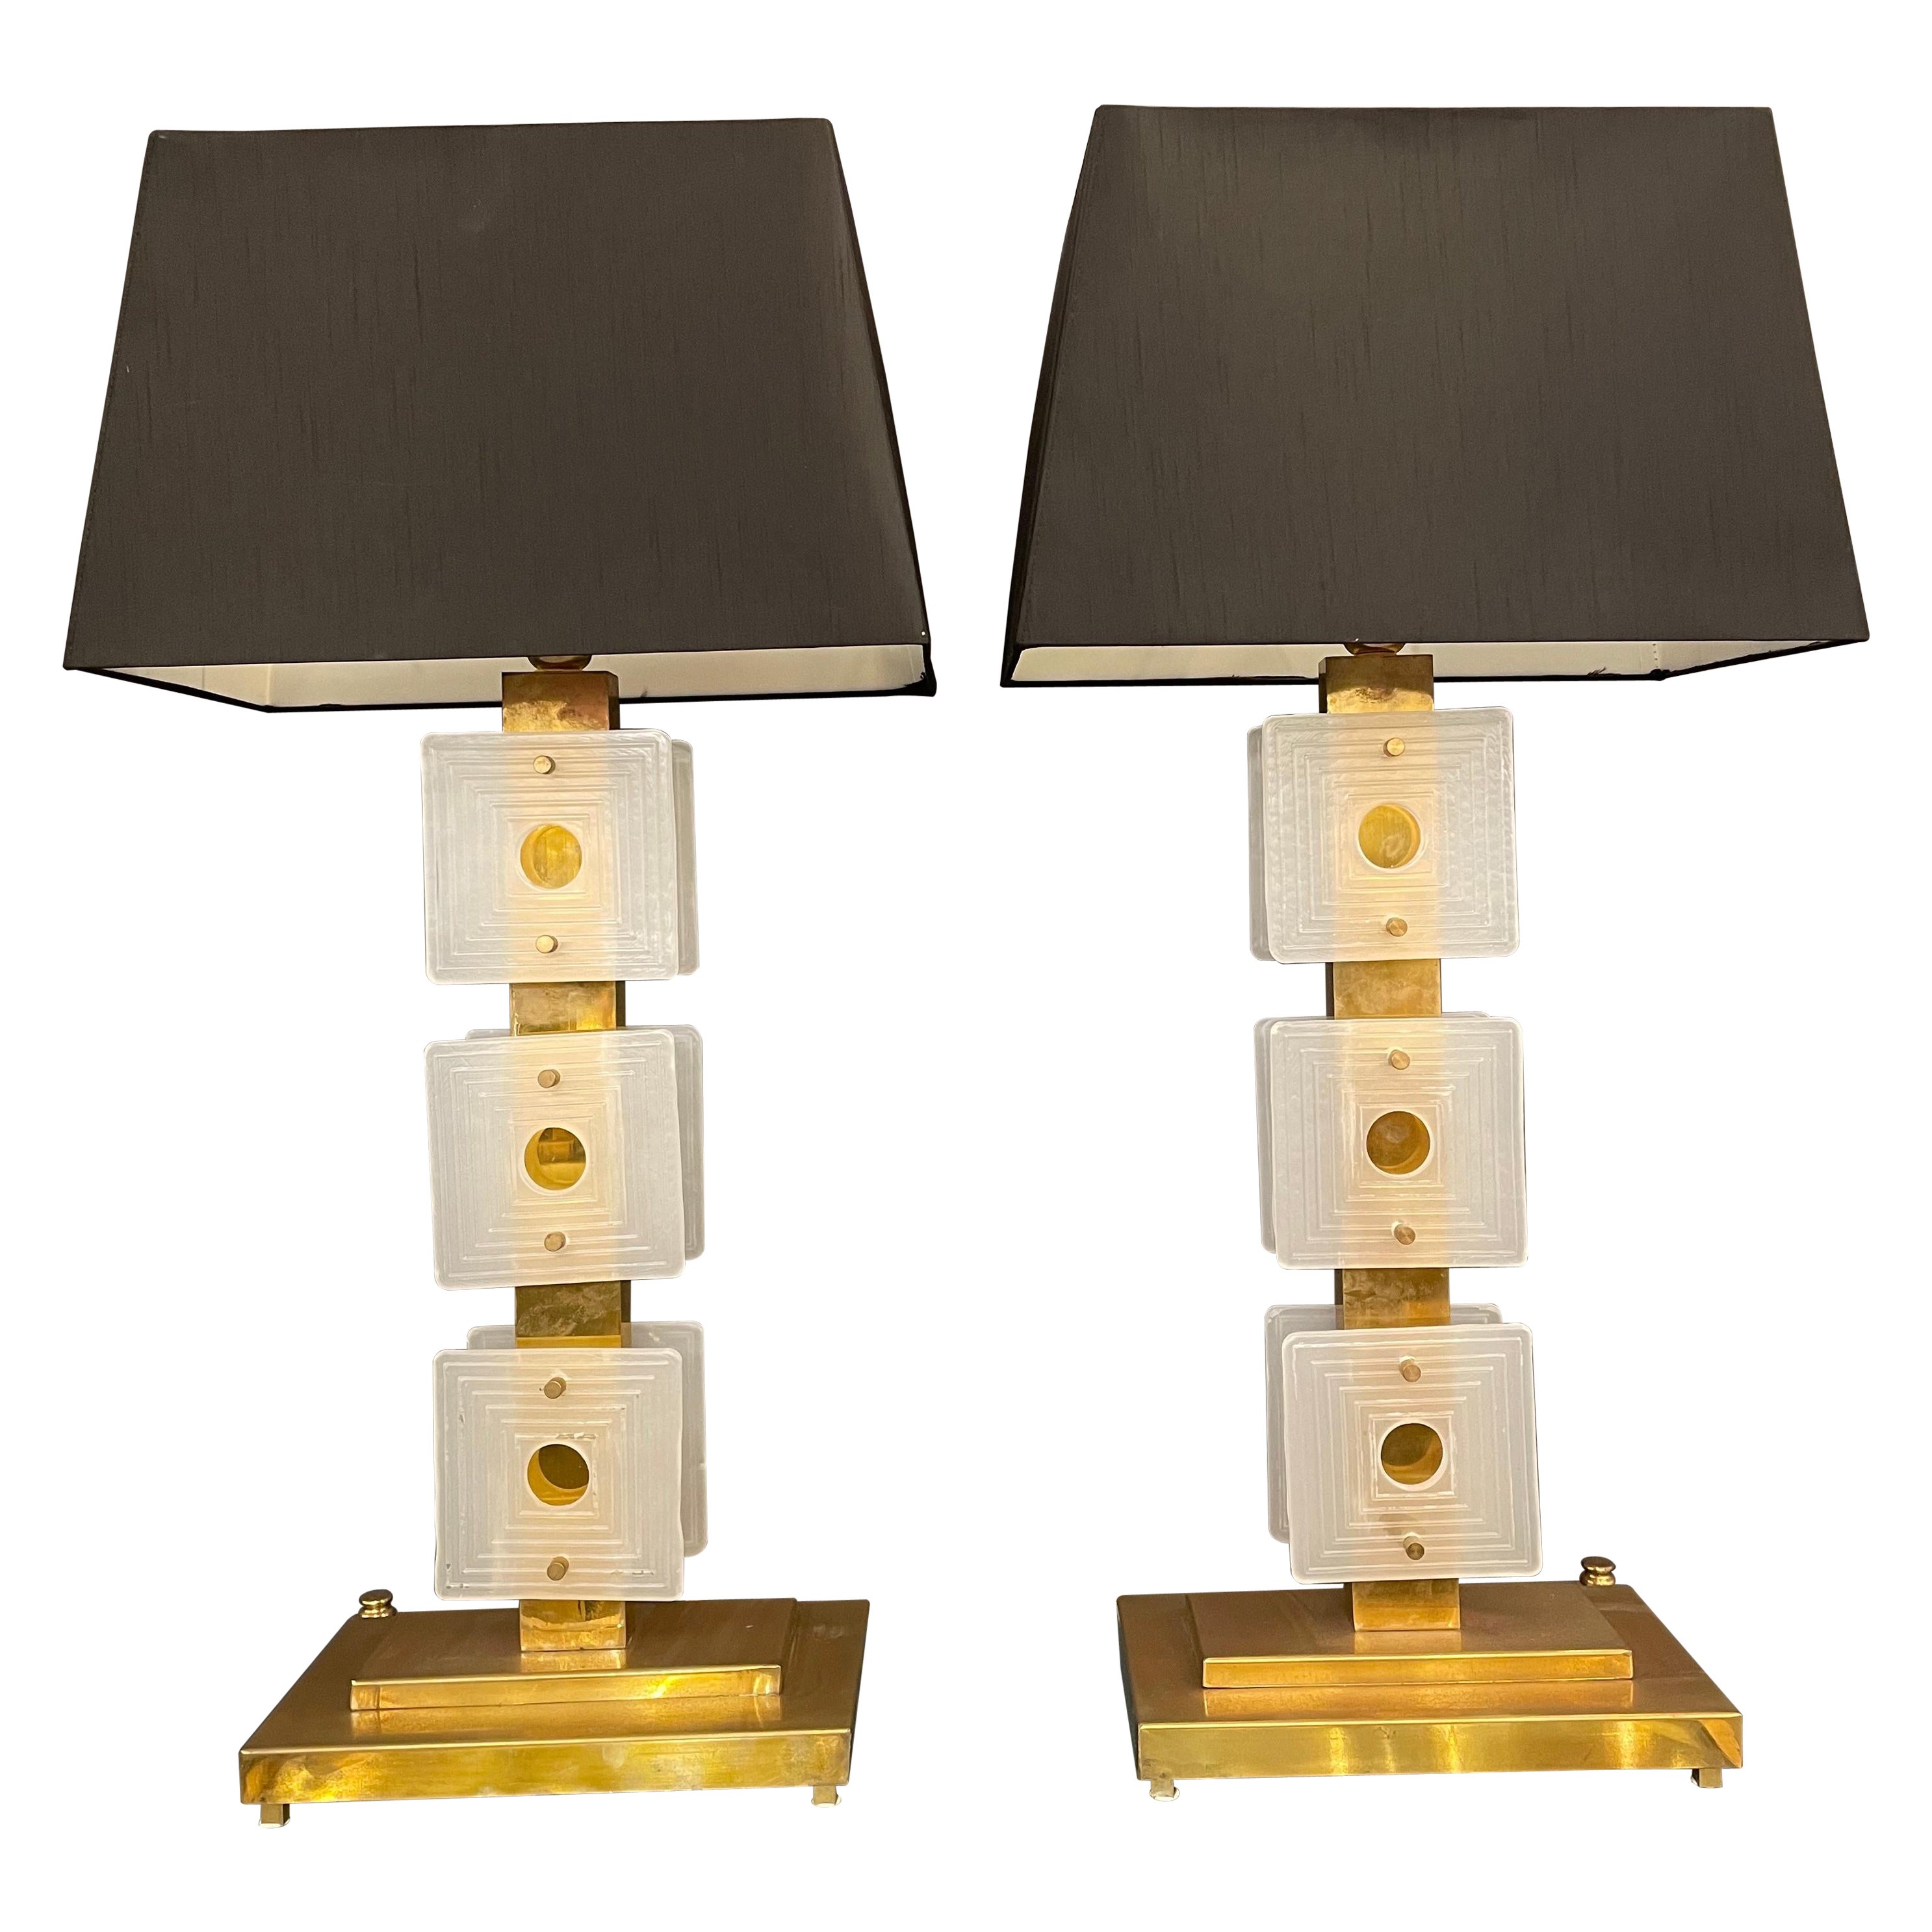 Pair of Italian Table Lamps in Brass and Murano Glass Decoration, circa 1980s For Sale